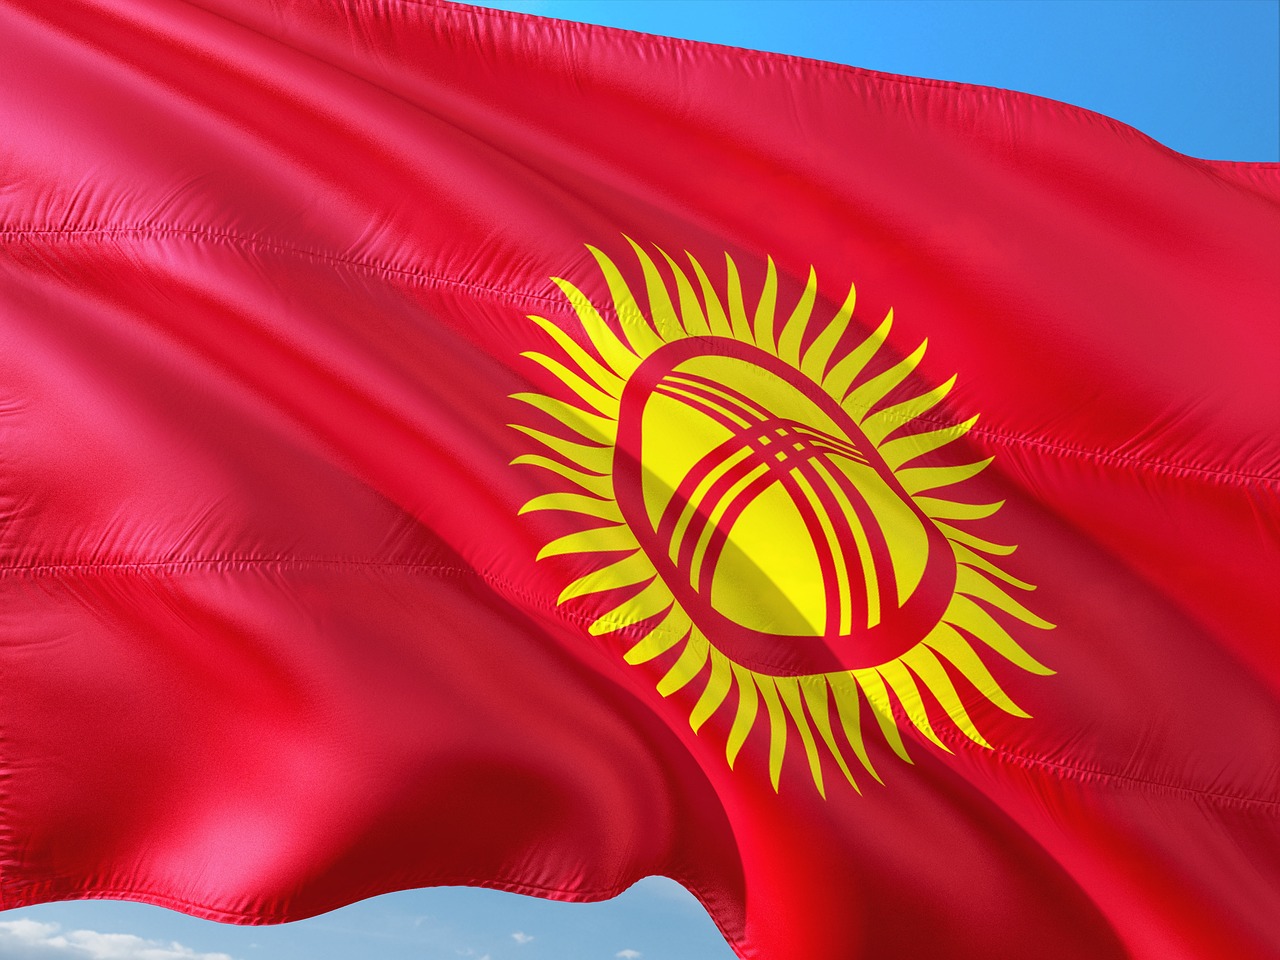 Kyrgyzstan parliament adopts law delaying parliamentary elections pending constitutional reform